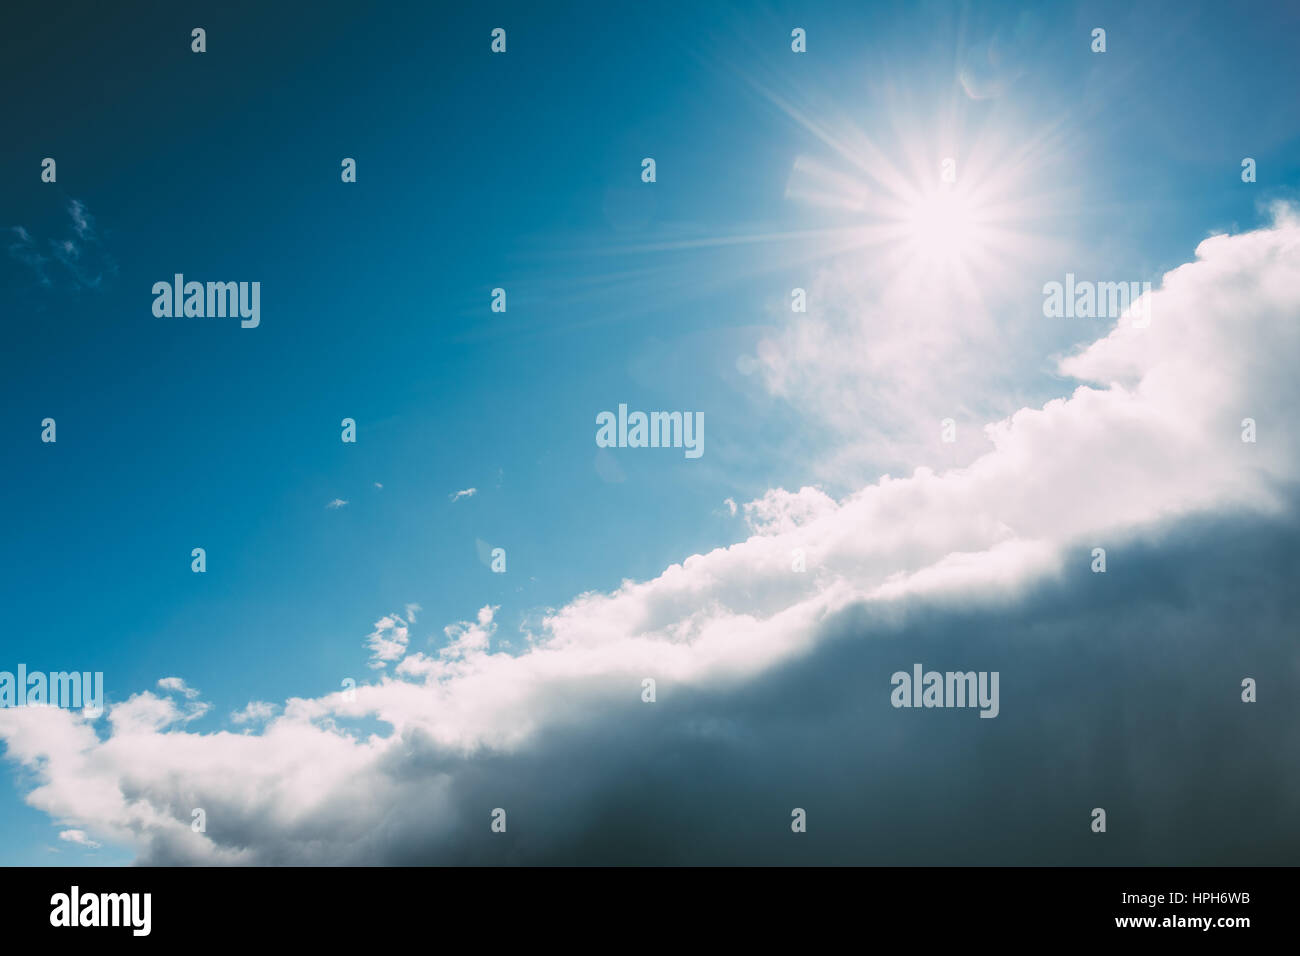 Dramatic Sky, Bright Blue And White Colors. Sun Shine Over Fluffy Clouds At Sunny Day Stock Photo